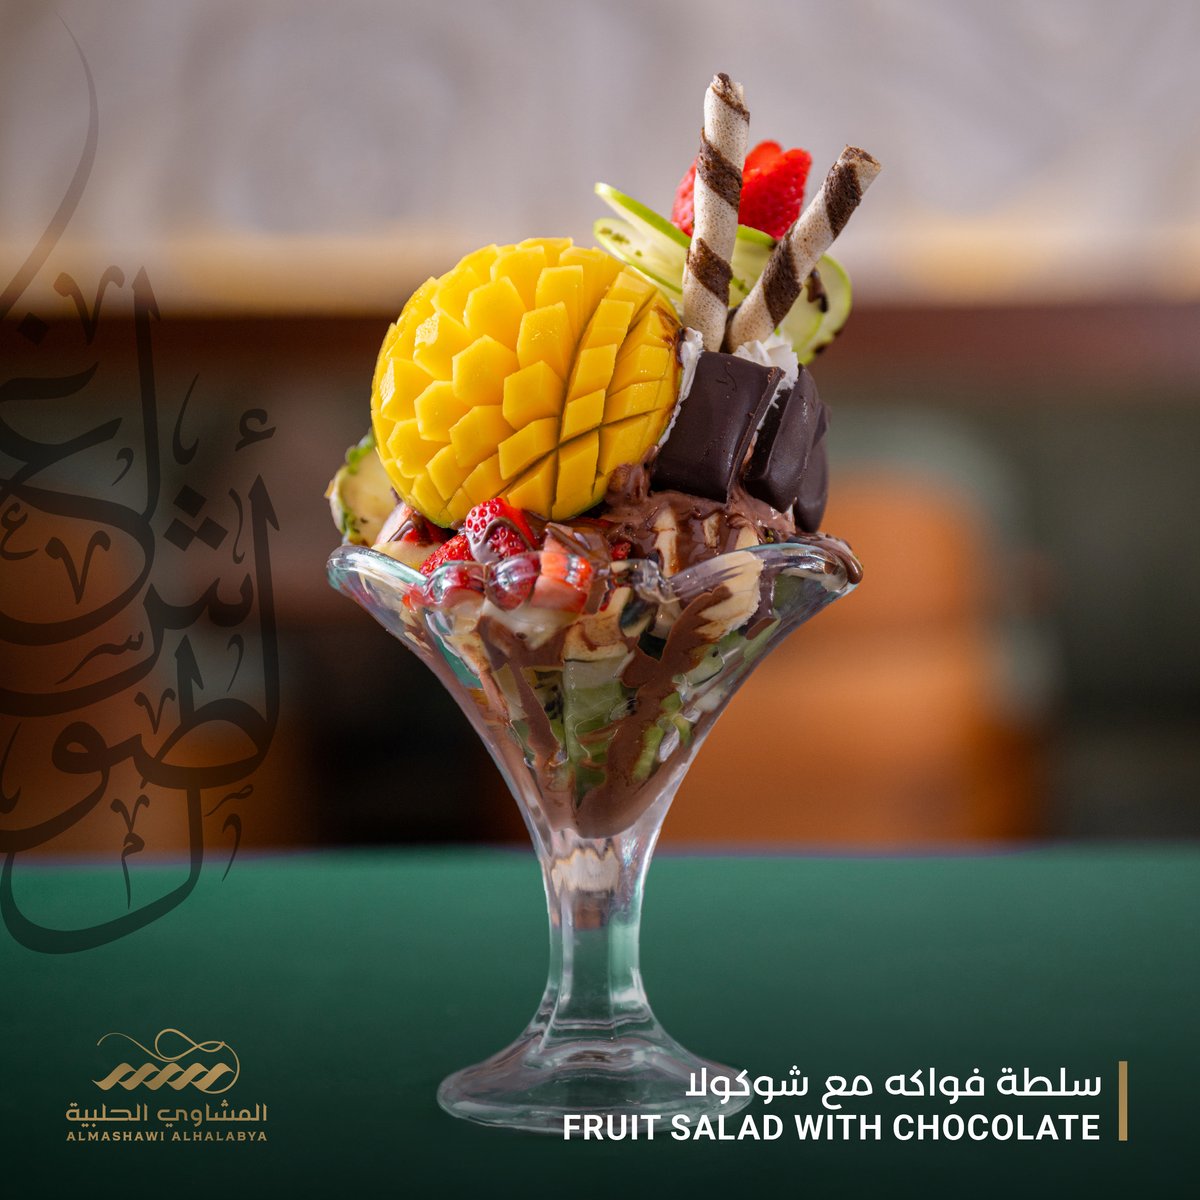 'Recharge your positive energy with a refreshing fruit salad immersed in delicious chocolate.
#aleppogrills #almashawialhalabya #breakfast_buffet #businesslunch #ladiesnight #sunsetoffer #grills #restaurant #cafe #best #arabicfood #lunchtime #deleciousfood #eatfresh #explore #dxb